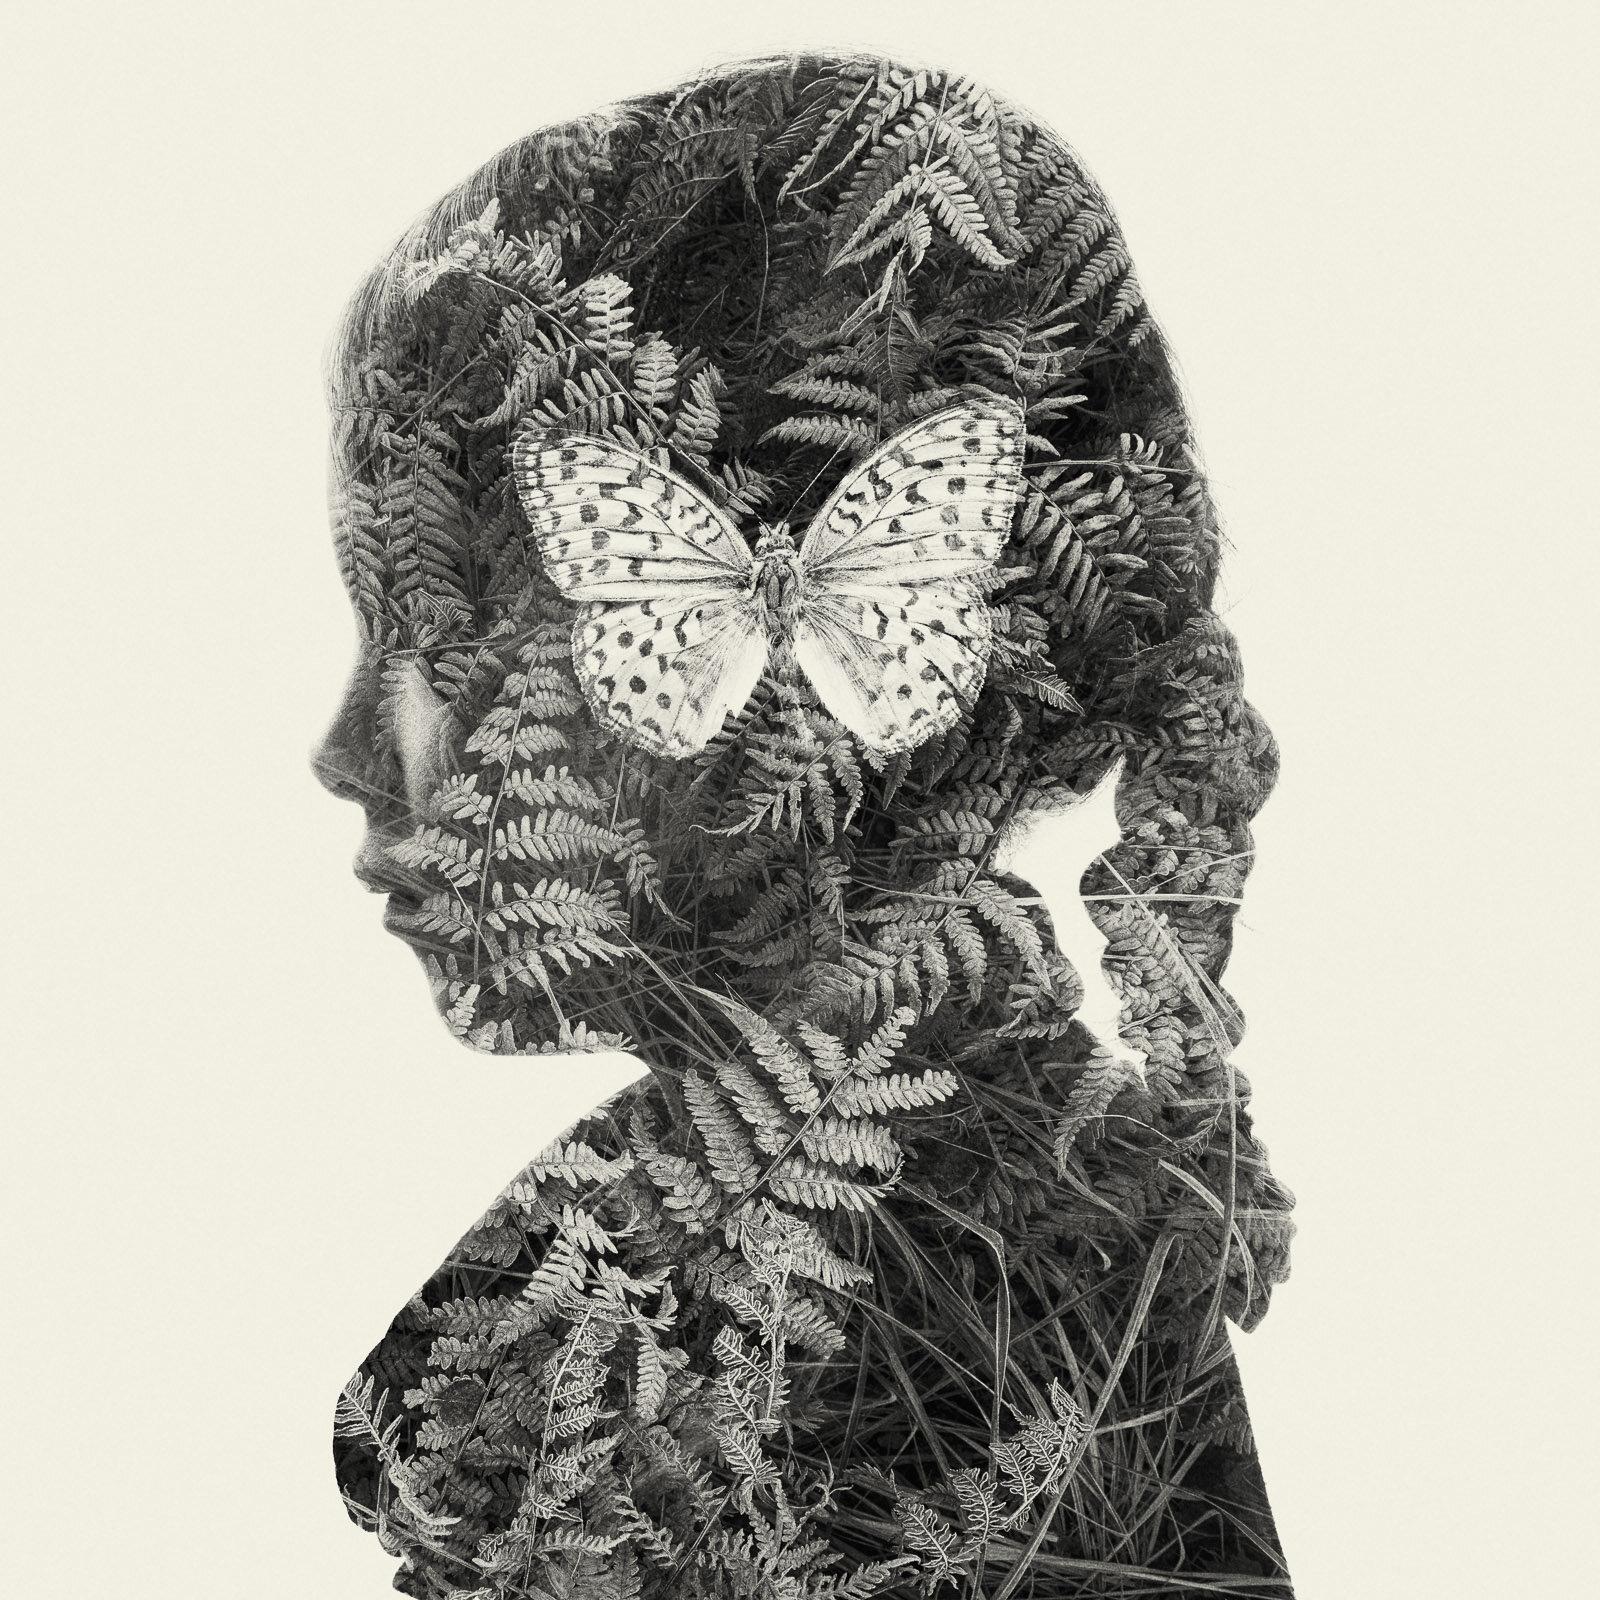 Christoffer Relander Landscape Photograph - Butterfly Mind - black and white portrait and nature multi exposure photograph